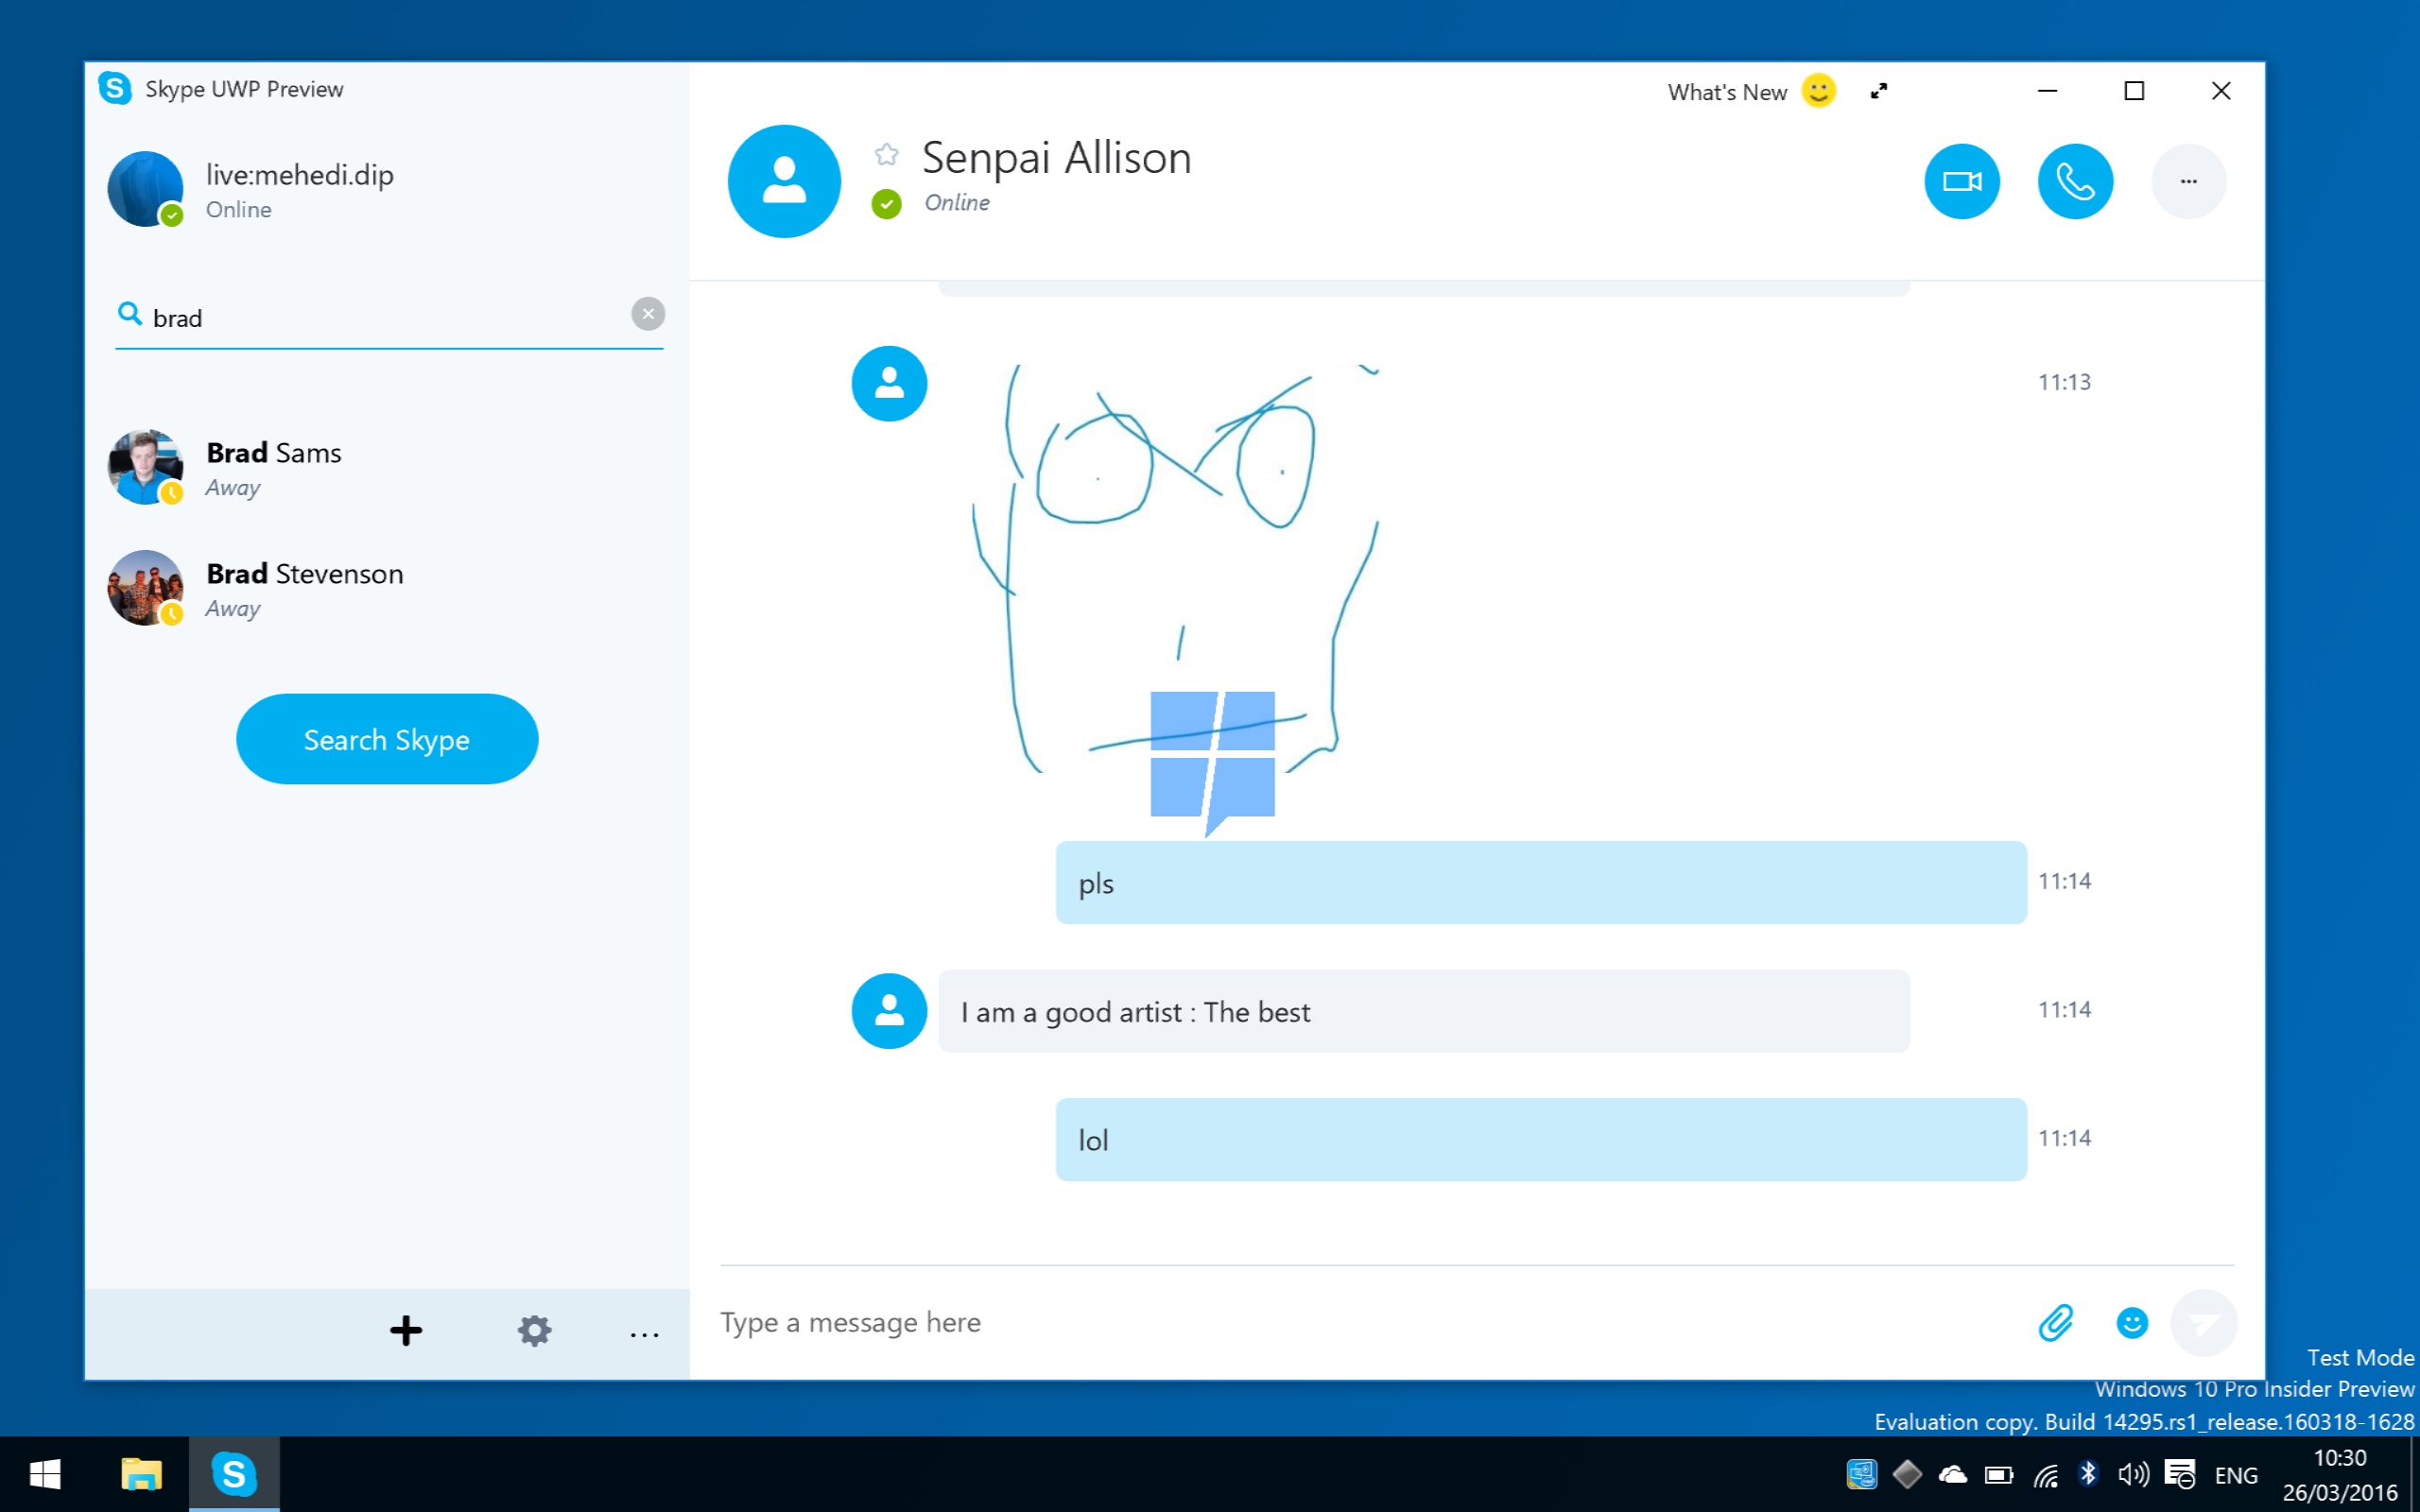 reddit what happened to skype id after microsoft